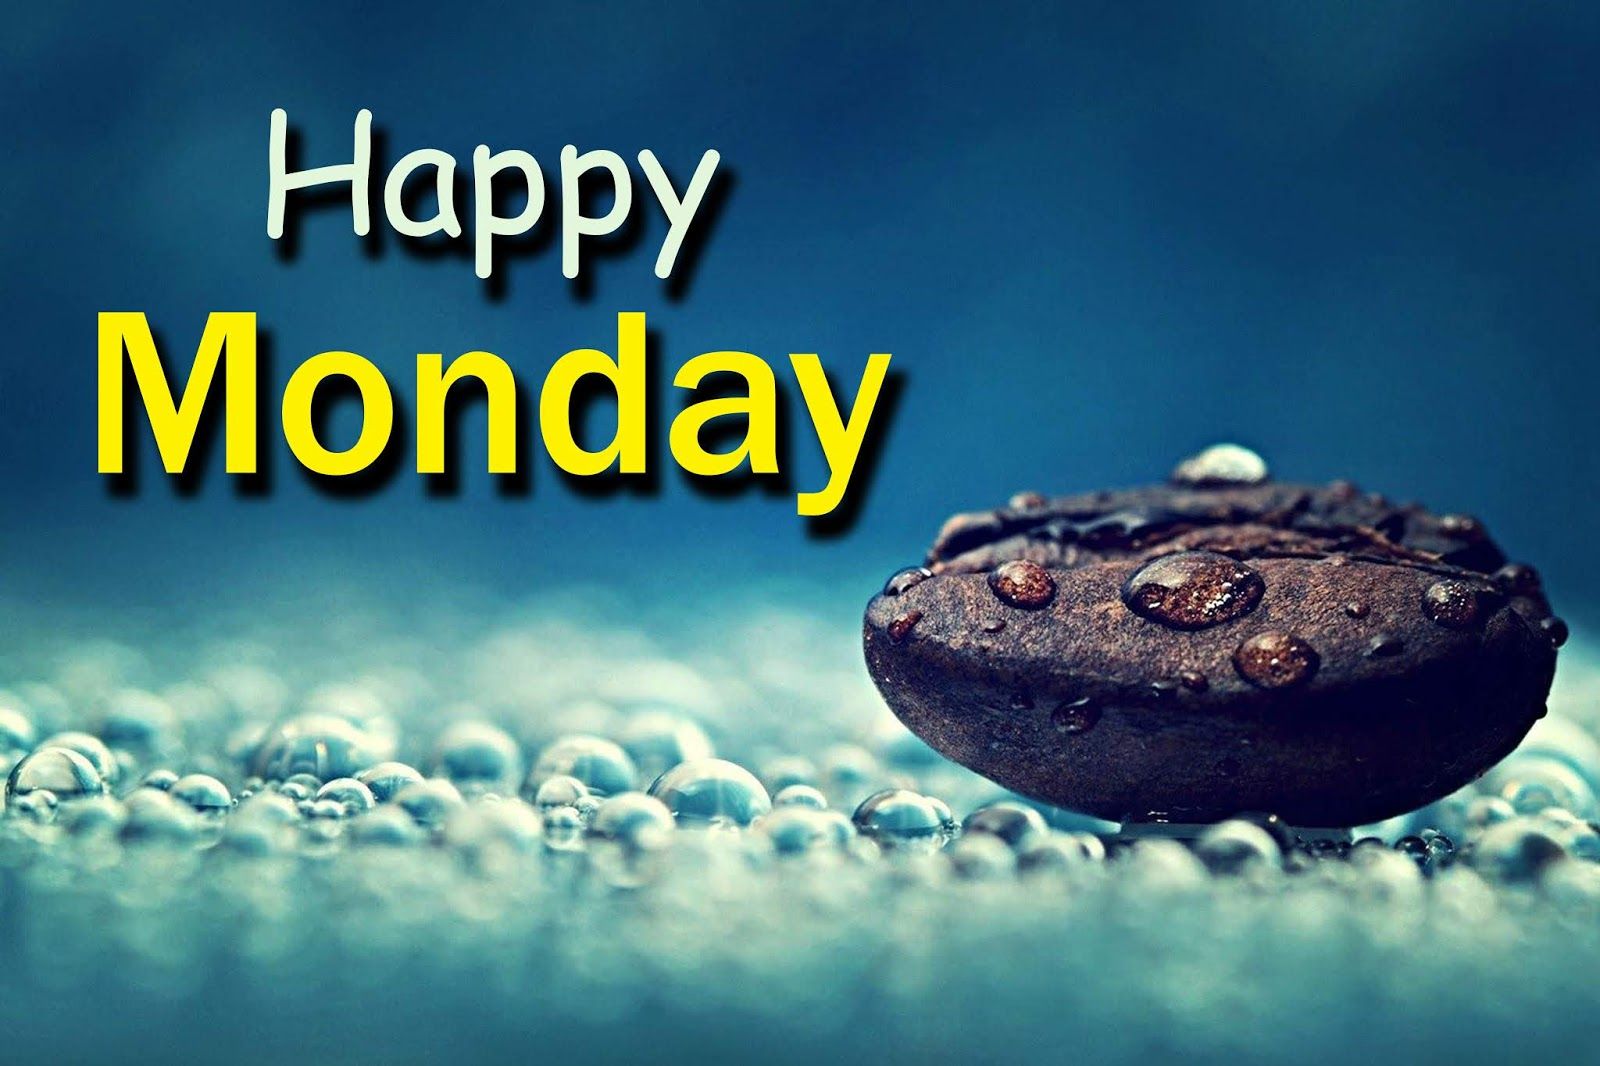 Happy Monday Quotes Picture, Photo, Image, and Pics for facebook